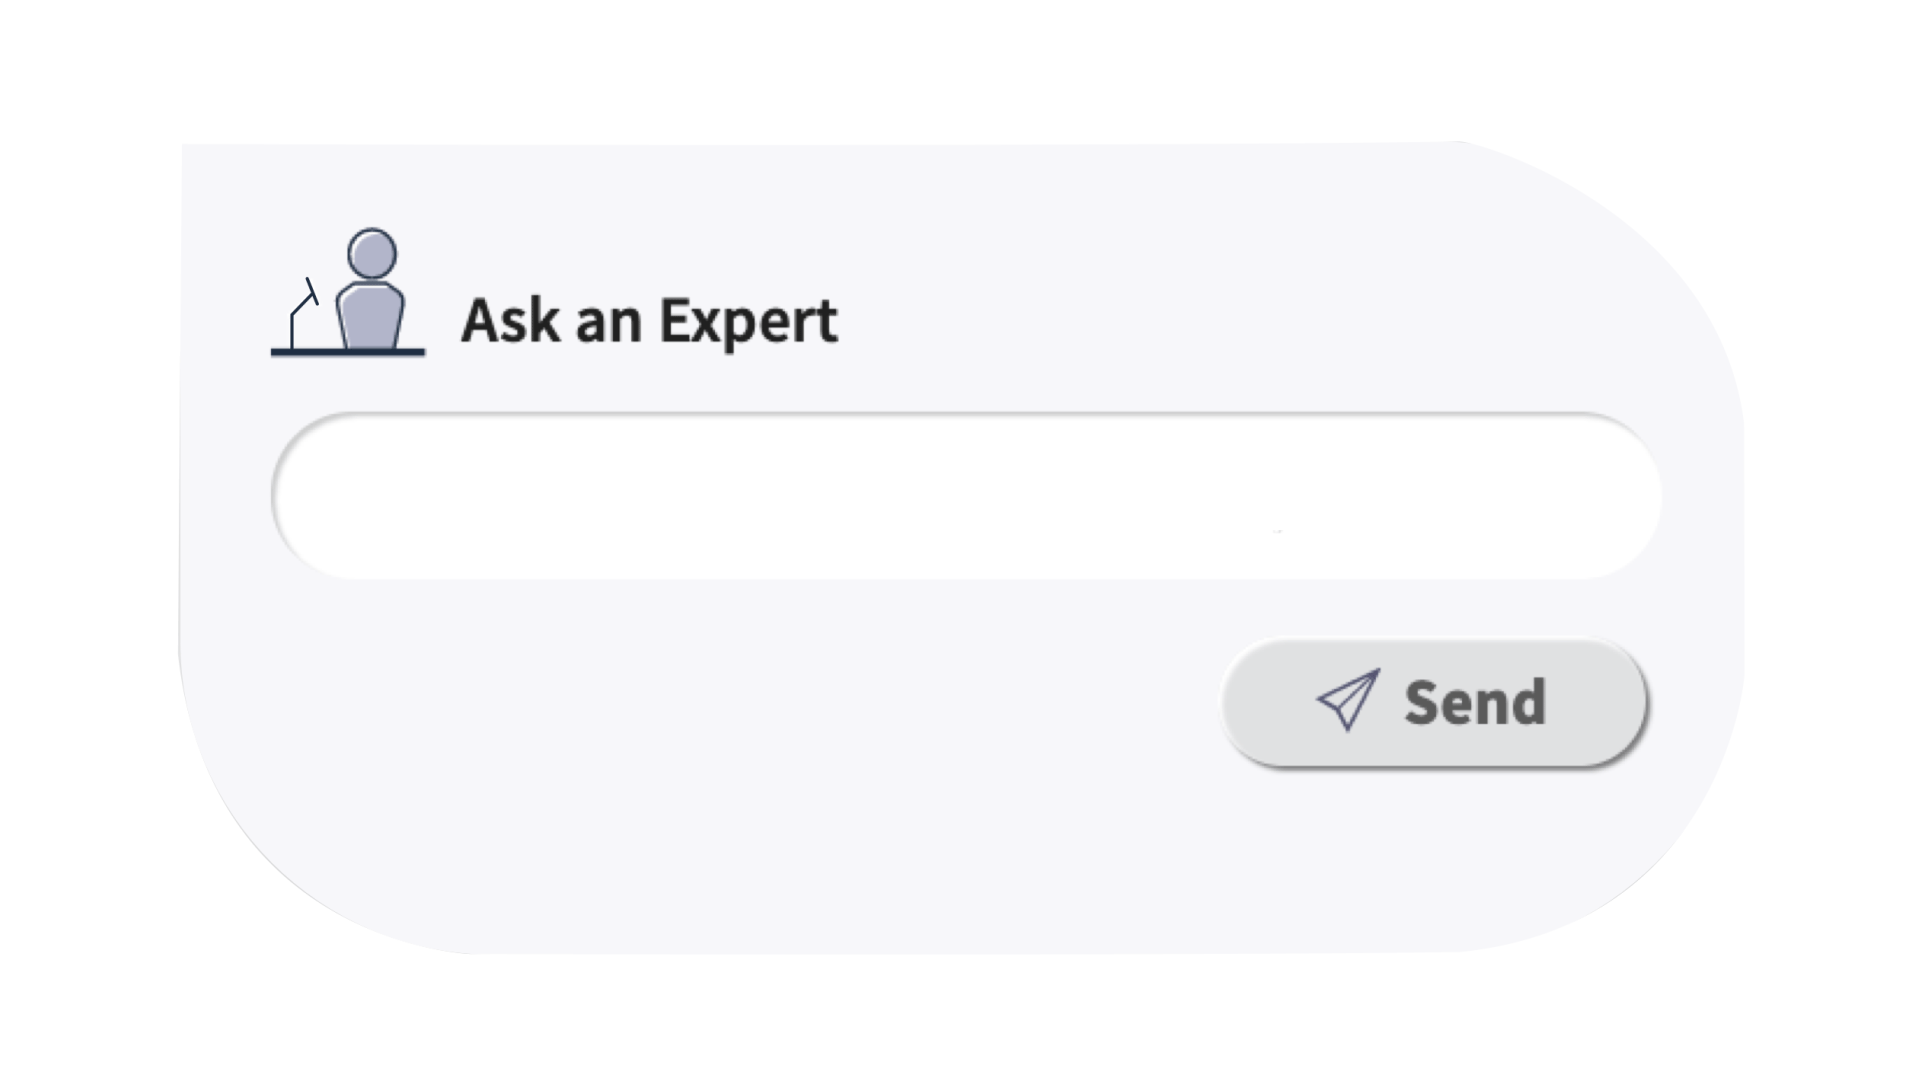 Expert Q&A, time-keeping, native language support, and certificates.